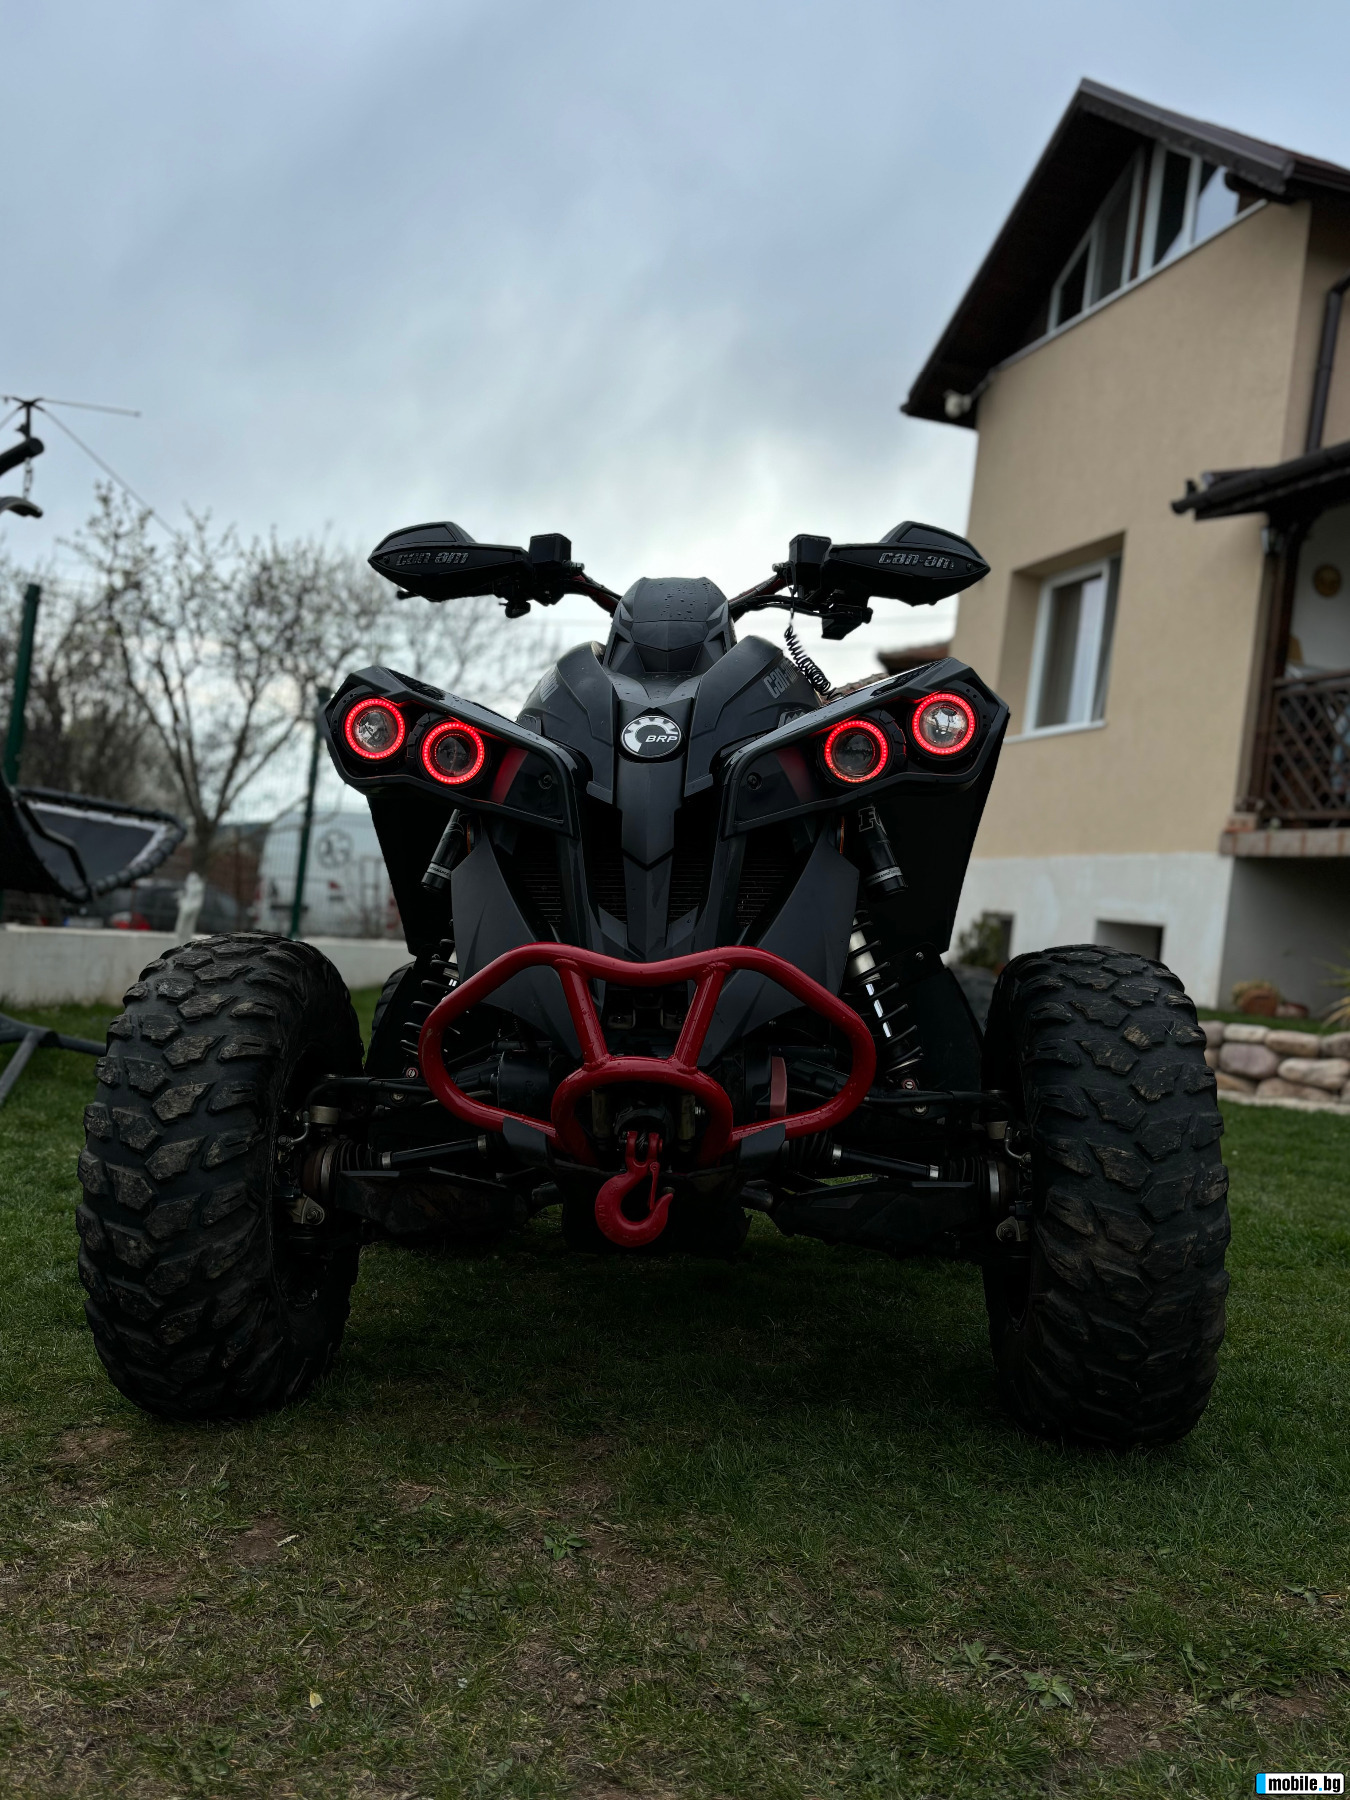 Can-Am Rengade 1000R Xxc | Mobile.bg   7